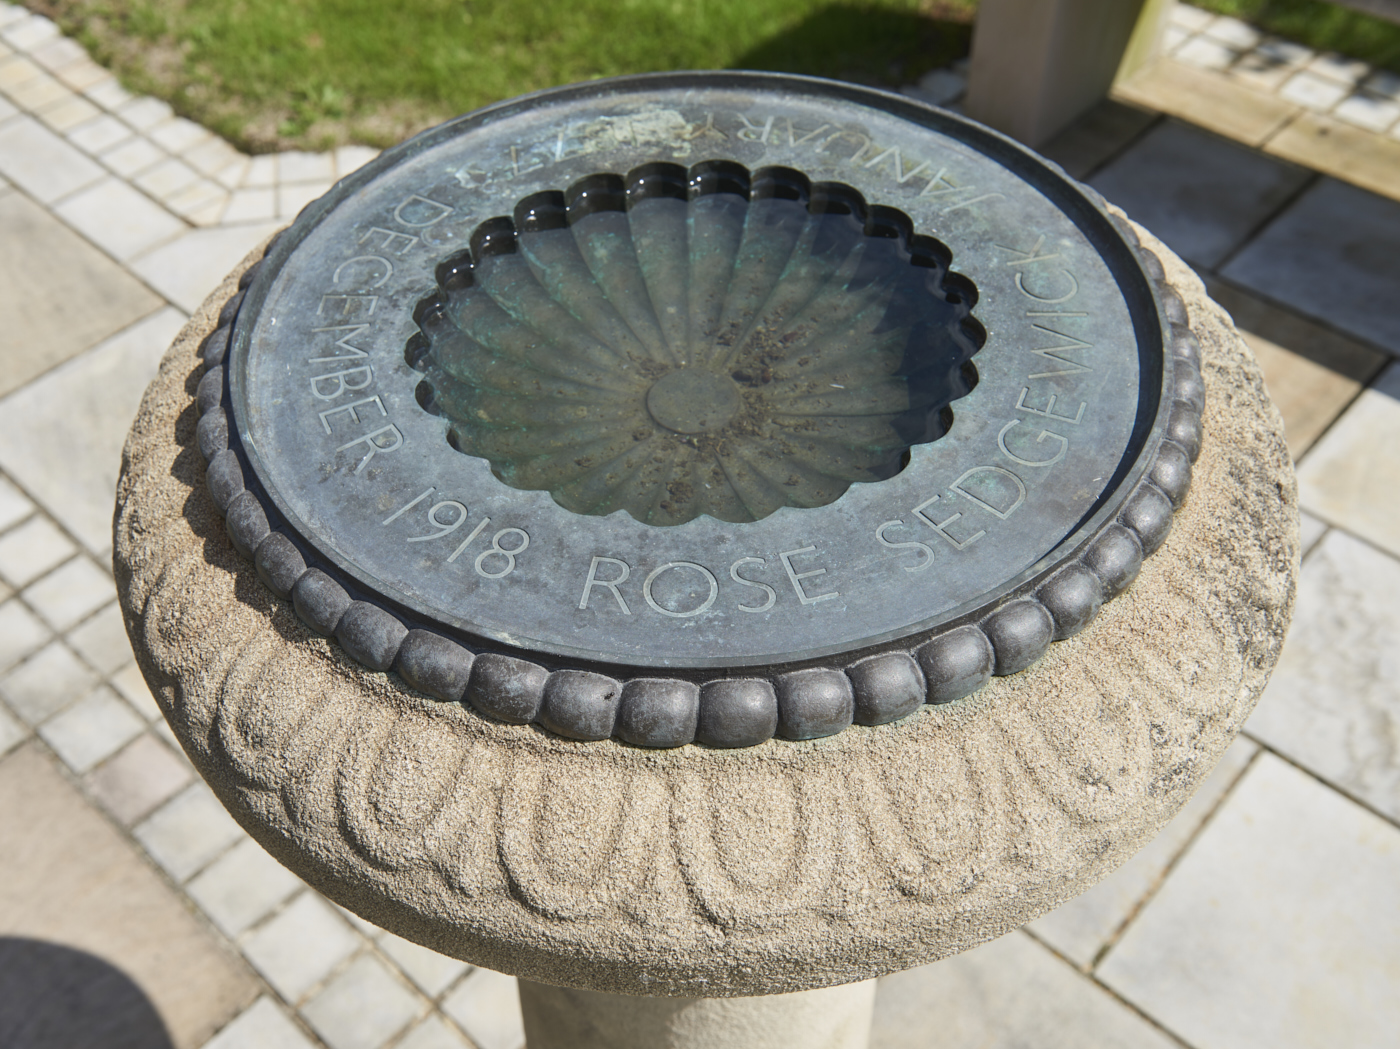 Close up from above of stone birdbath with ornate lead inner bowl, inscribed with the words 'Rose Sedgewick January 1877- December 1918'